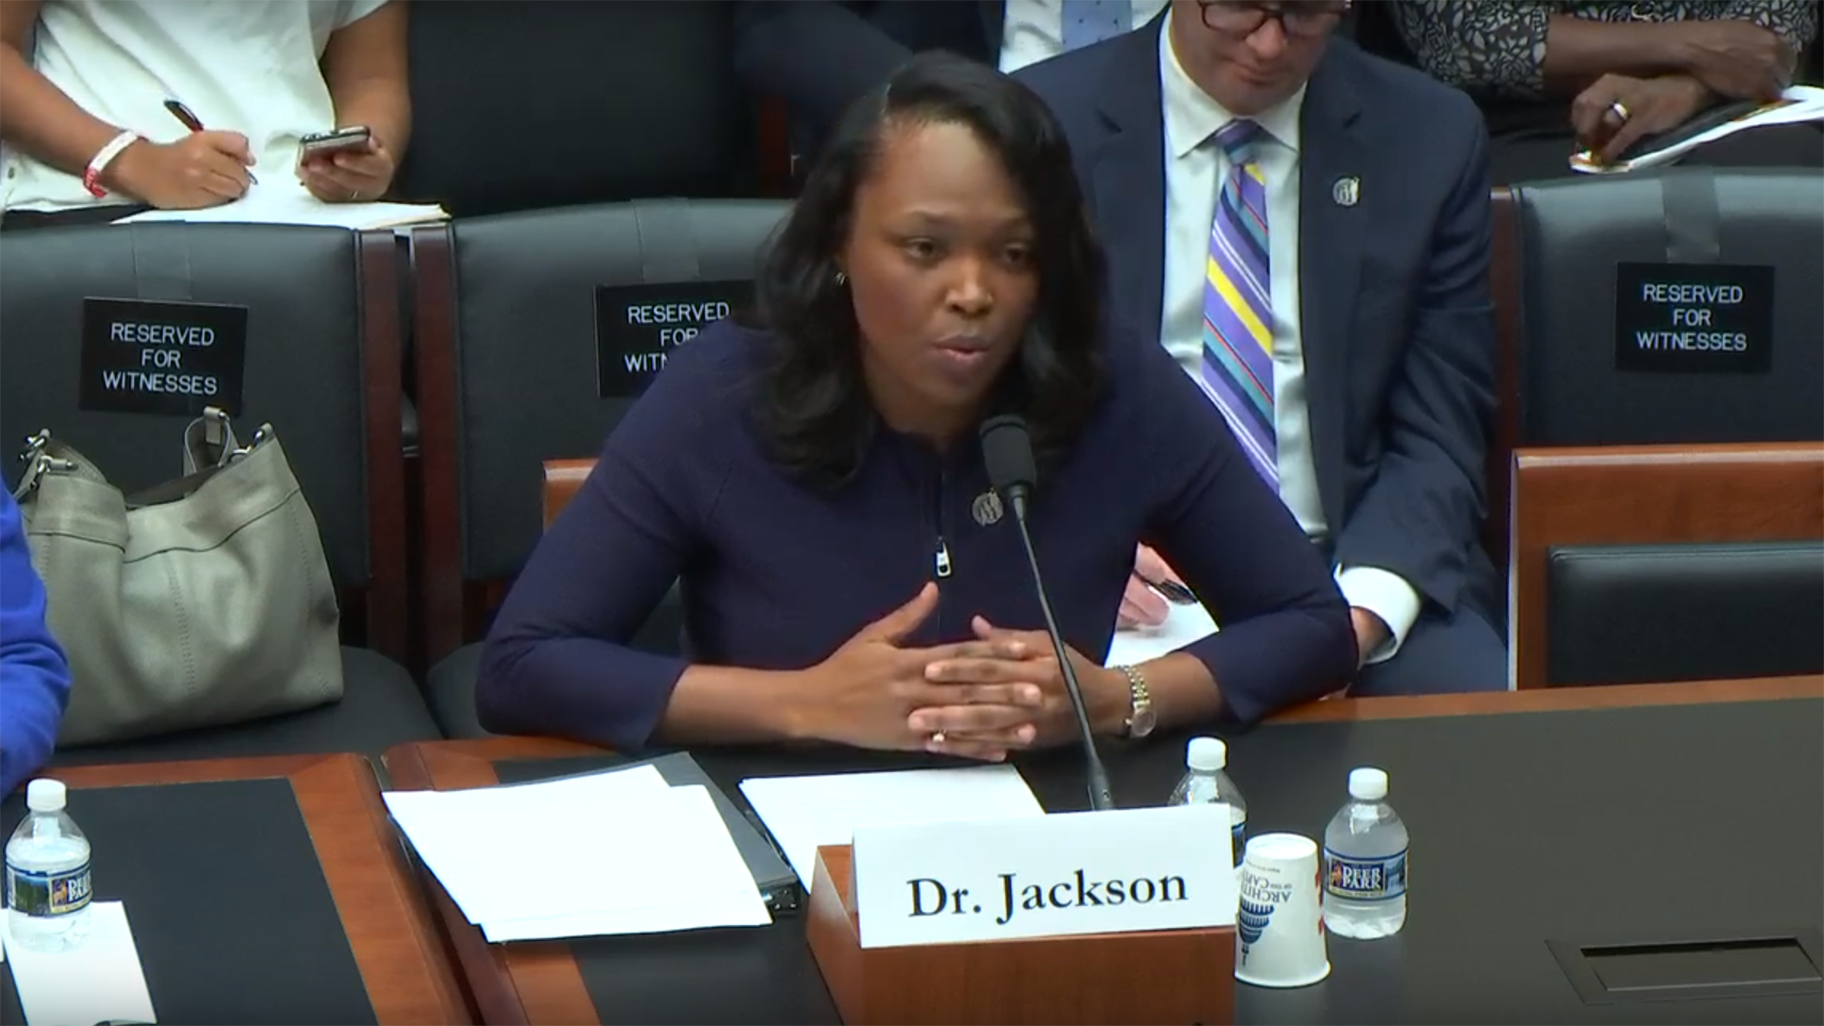 CPS CEO Janice Jackson speaks before the House of Representatives’ Subcommittee on Early Childhood, Elementary and Secondary Education in Washington D.C., on Wednesday, Sept. 11, 2019. (Credit: House Committee on Education and Labor)